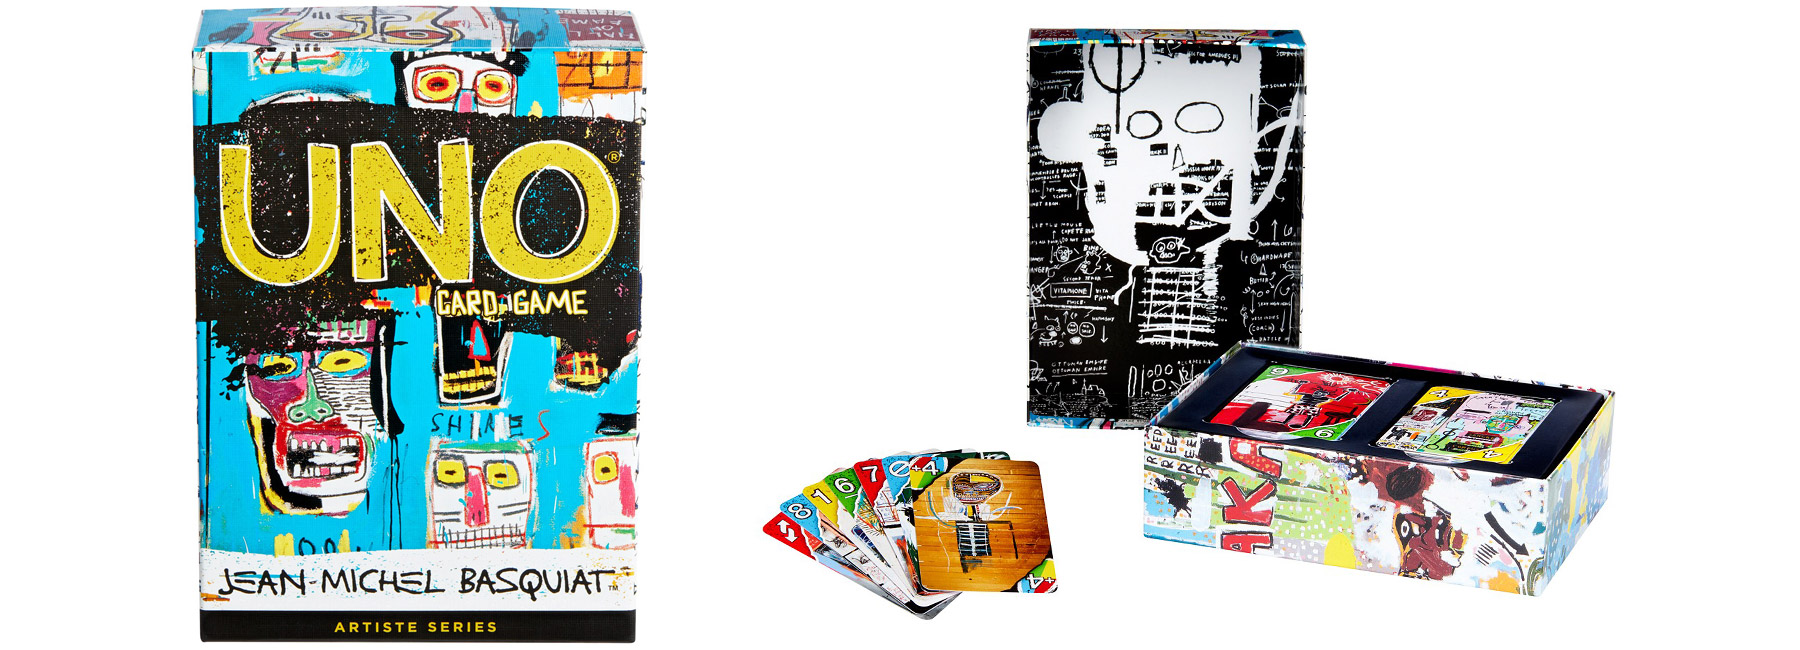 the jean michel basquiat UNO is a collectible deck available for a limited time